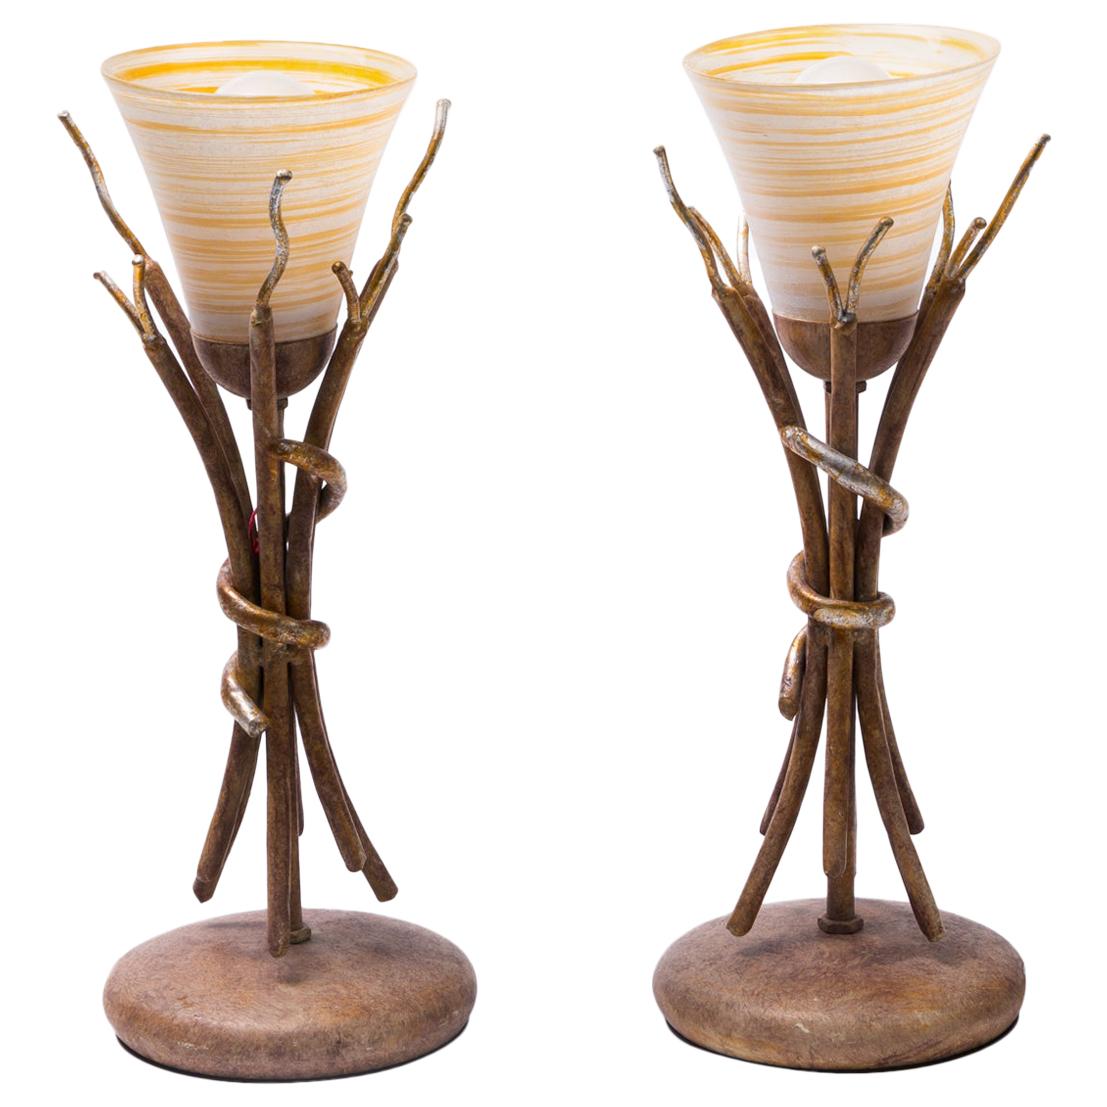 Pair of Sculptural, Morphic Table Lamps, Postmodernism, France, 1970s-1980s For Sale